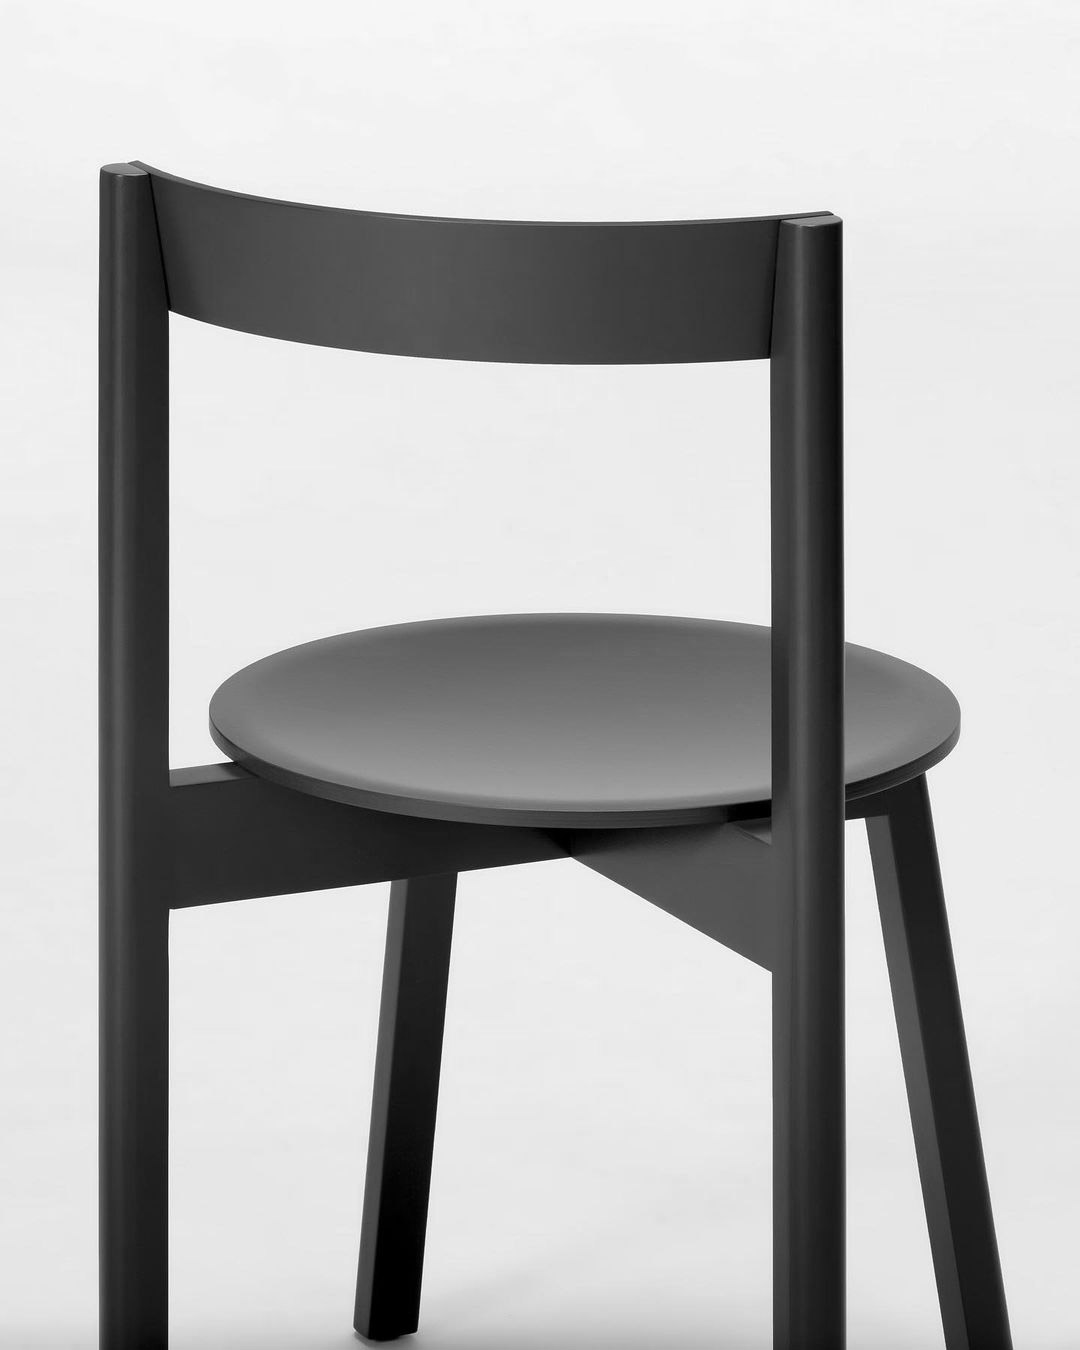 L5 Jazz Chair by LOEHR